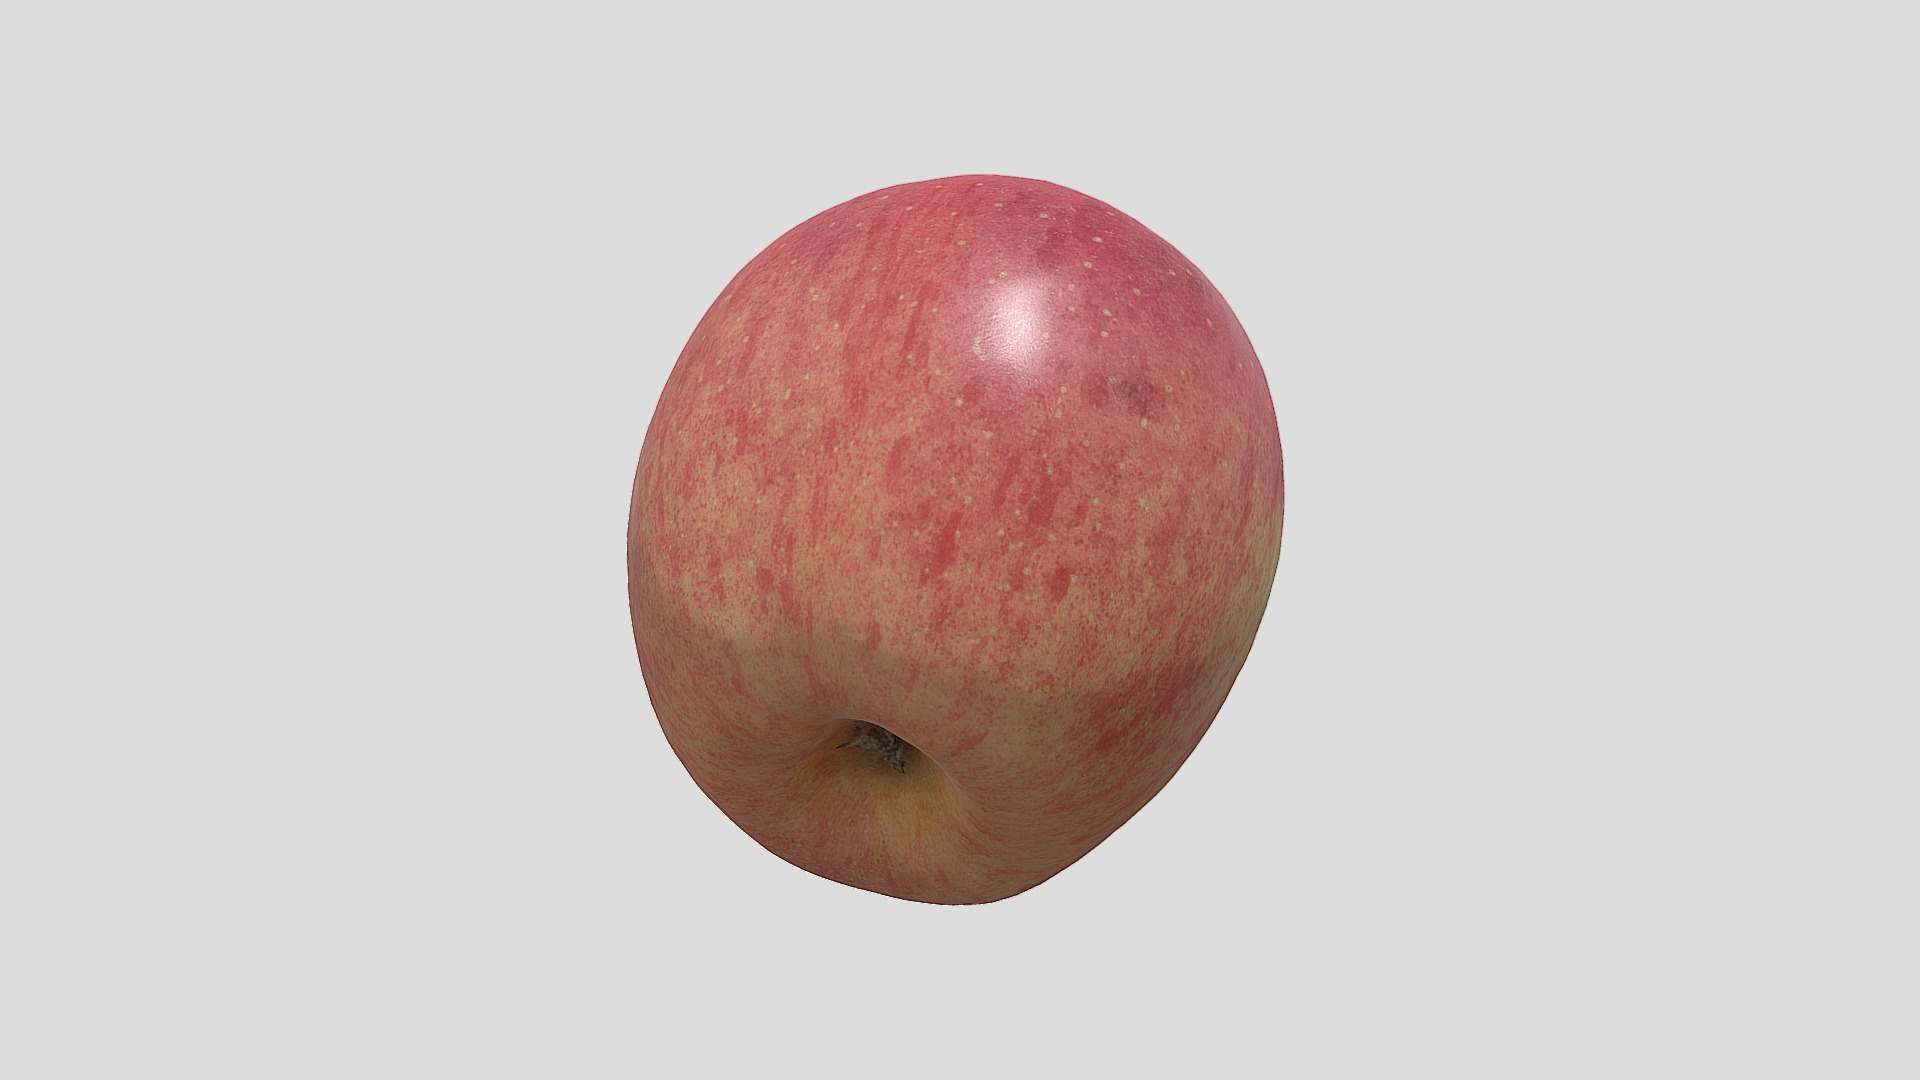 3D model Apple - This is a 3D model of the Apple. The 3D model is about a red apple with a stem.